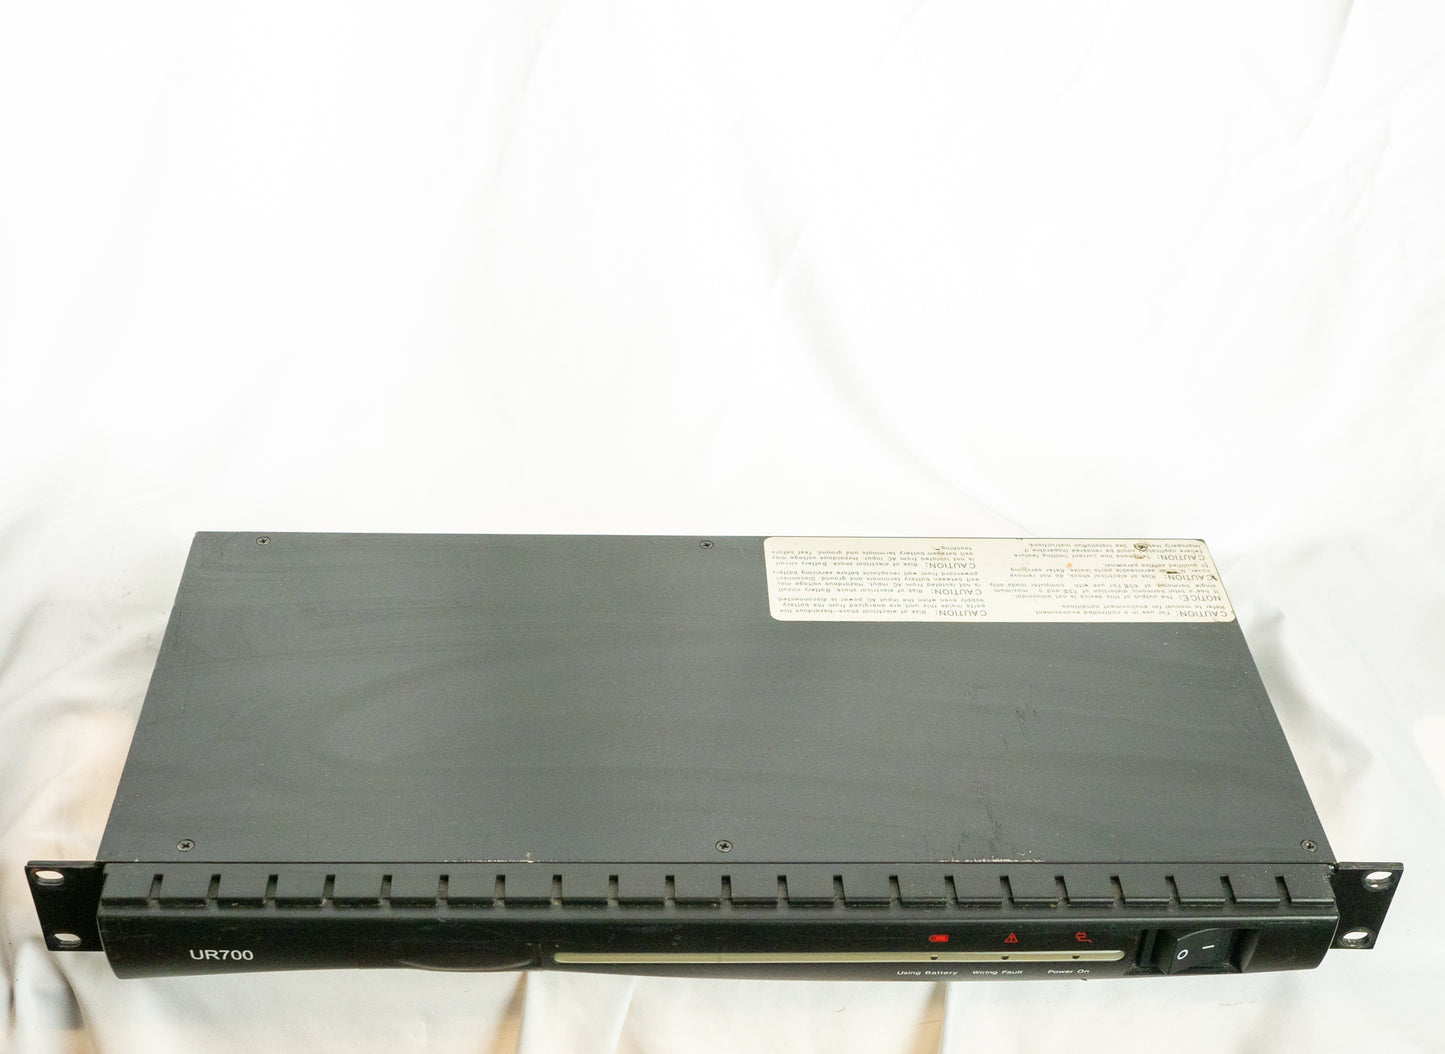 Cyberpower UR-700 empty box project, sold "AS IS", may be unsafe, for pros only.